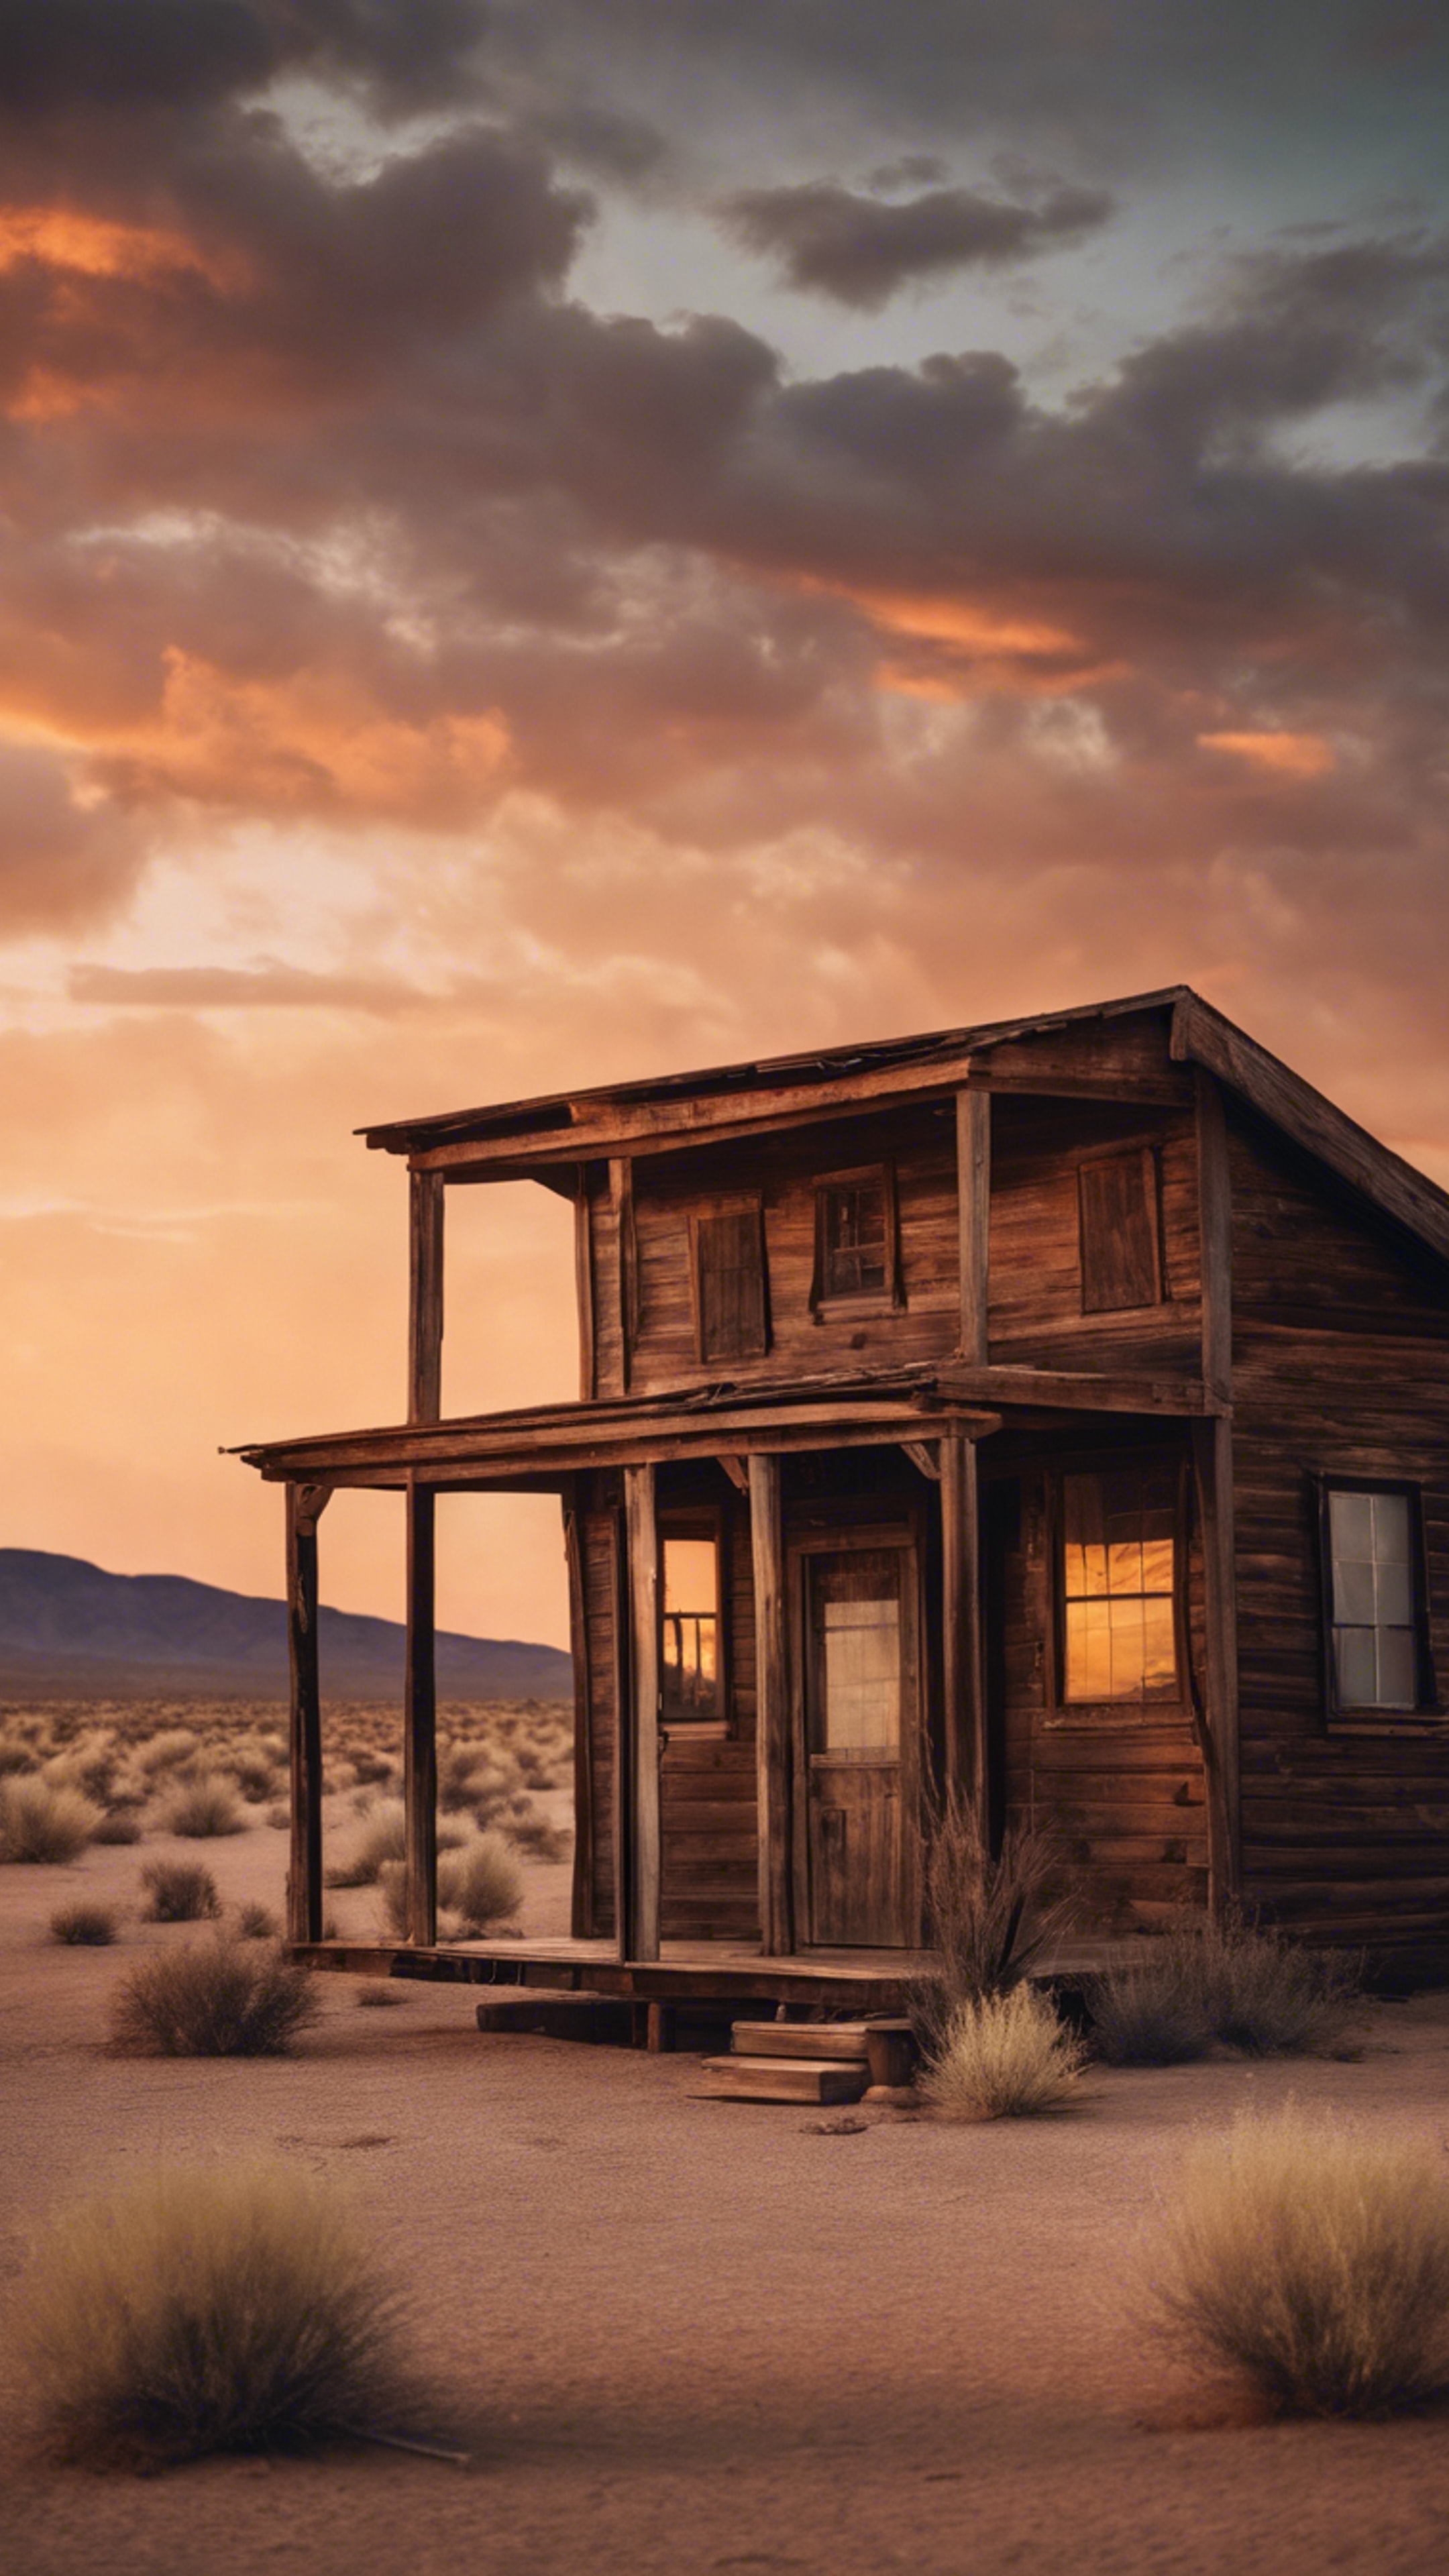 A dust-swept desert scene with a lone cabin standing resiliently during a blazing sunset in the wild west. Wallpaper[55ae6b4a2ff440e59218]